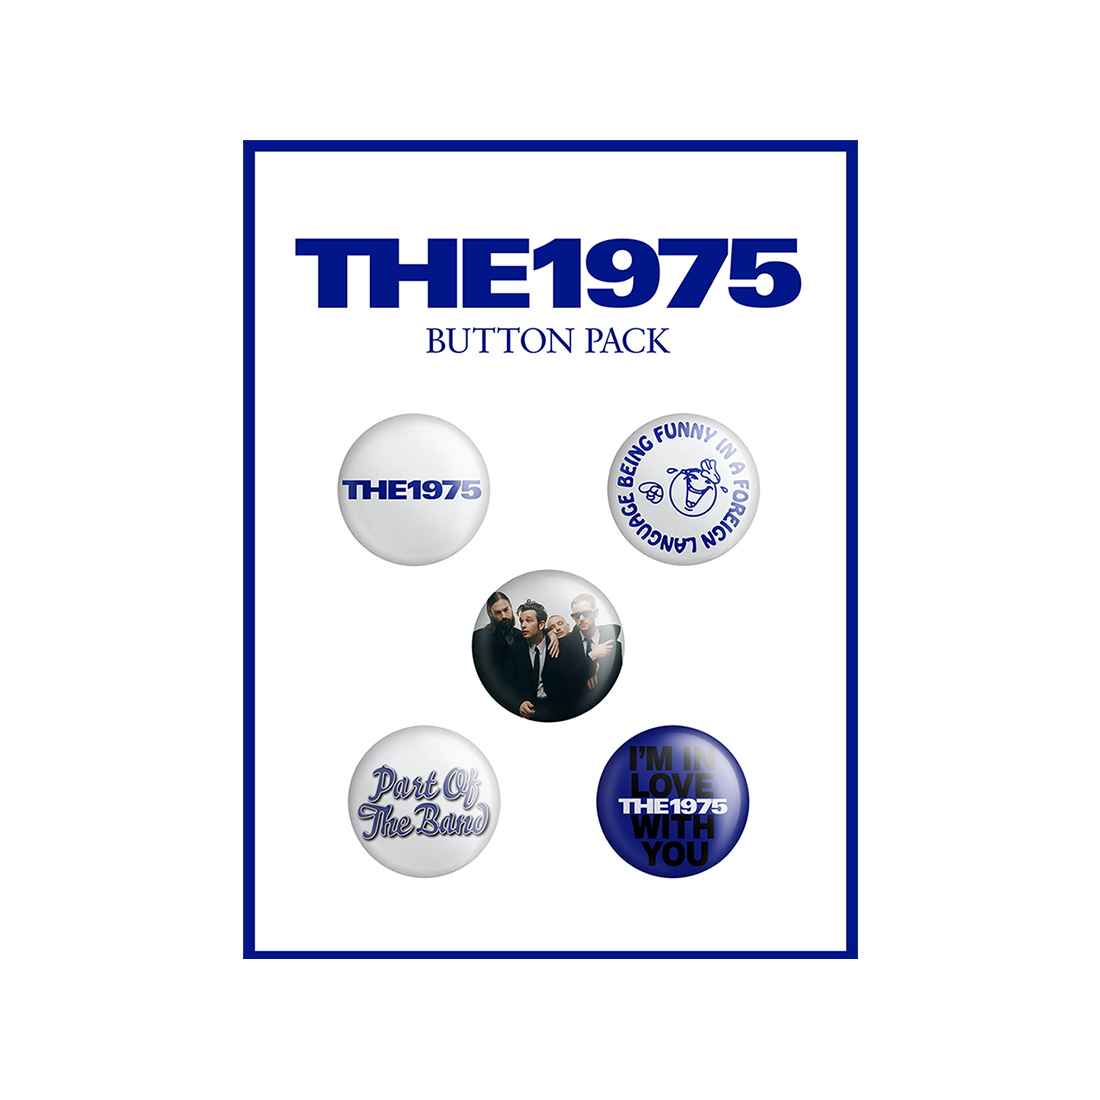 The 1975 - The 1975 Button Pack